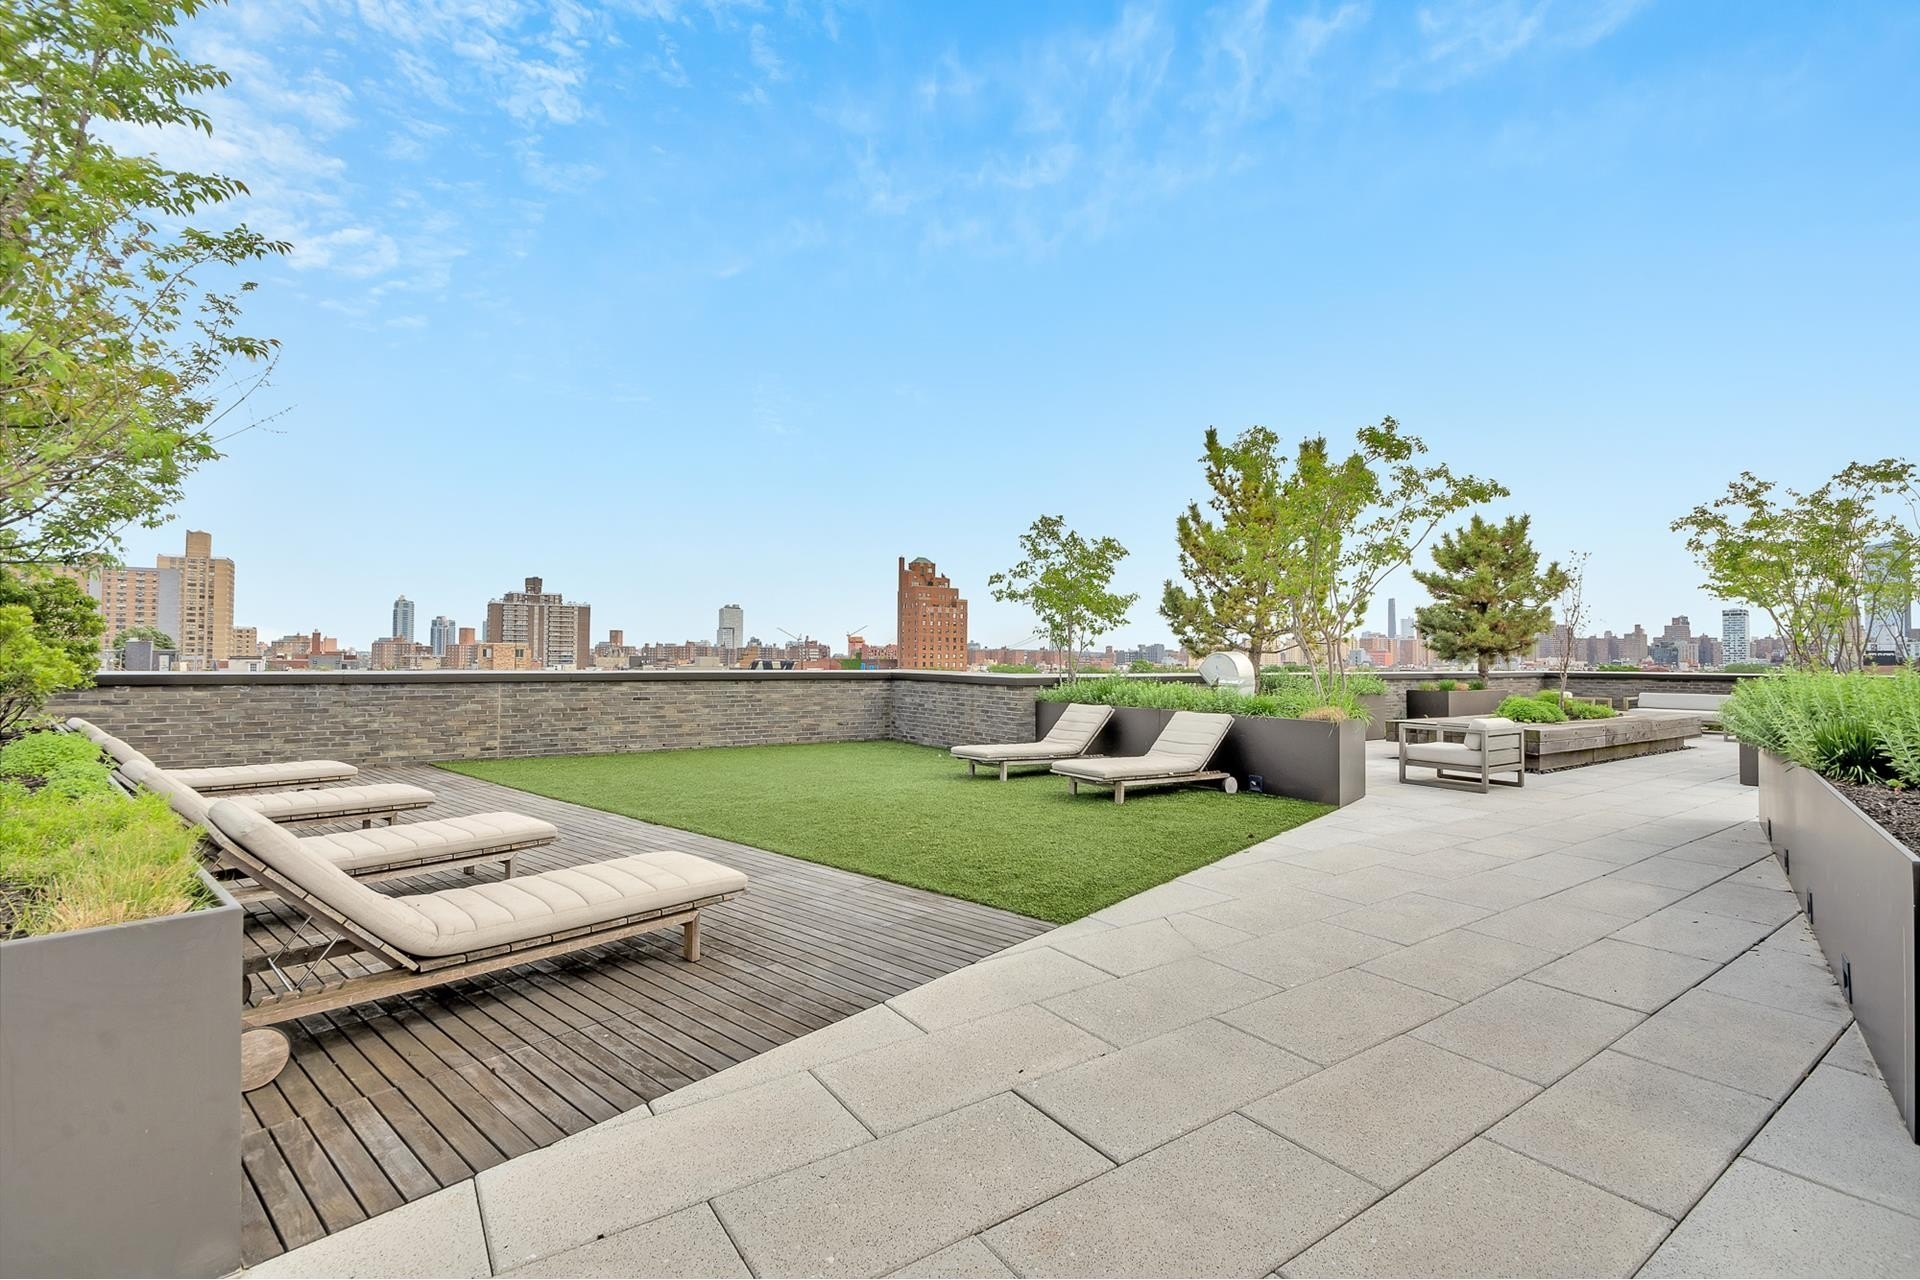 14. Condominiums for Sale at Steiner East Villag, 438 E 12TH ST, 3E East Village, New York, NY 10009